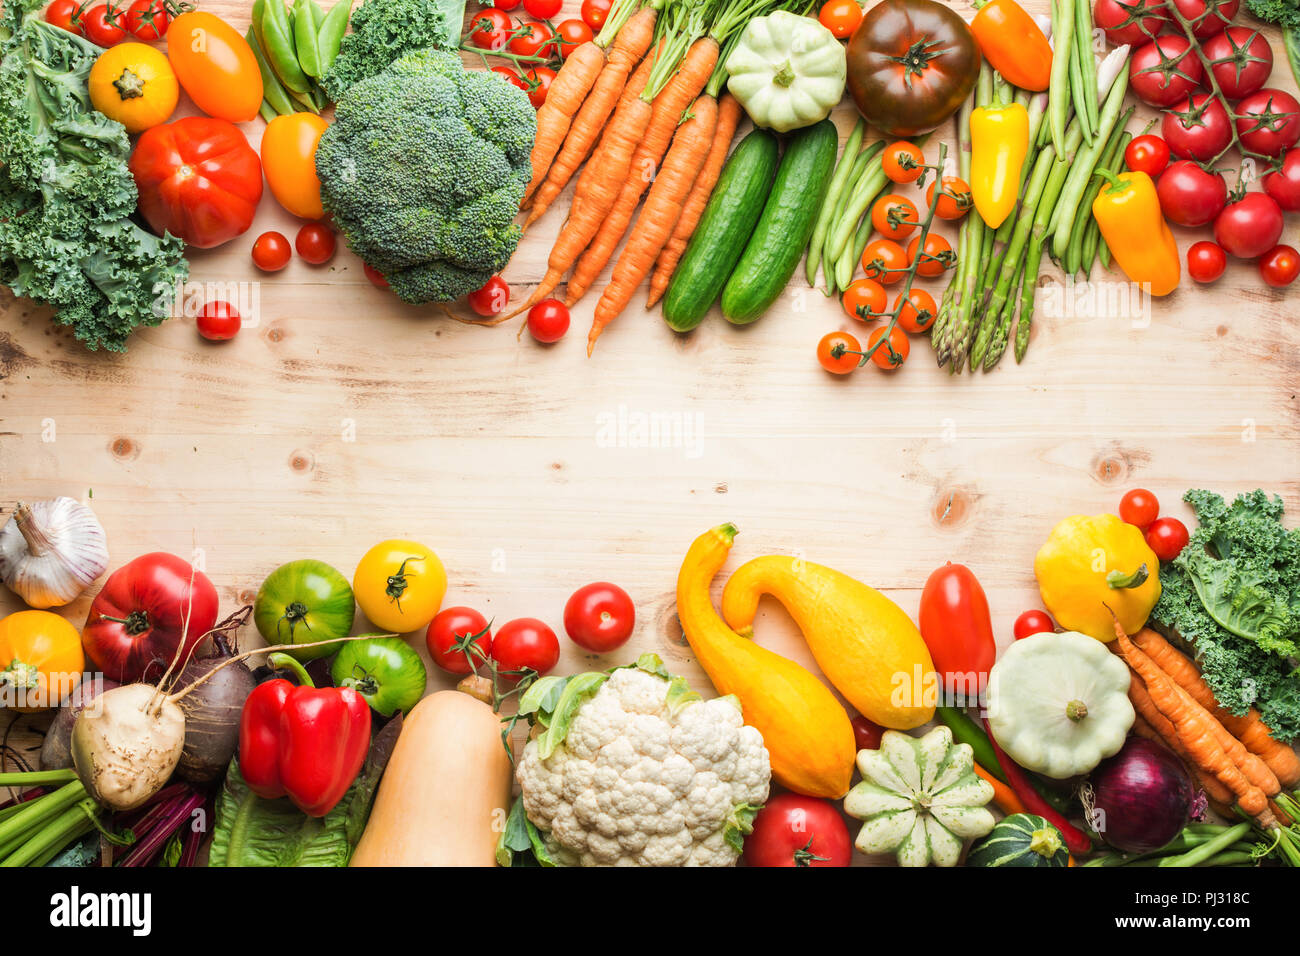 https://c8.alamy.com/comp/PJ318C/fresh-farm-produce-organic-vegetables-on-wooden-pine-table-healthy-background-copy-space-for-text-top-view-selective-focus-PJ318C.jpg